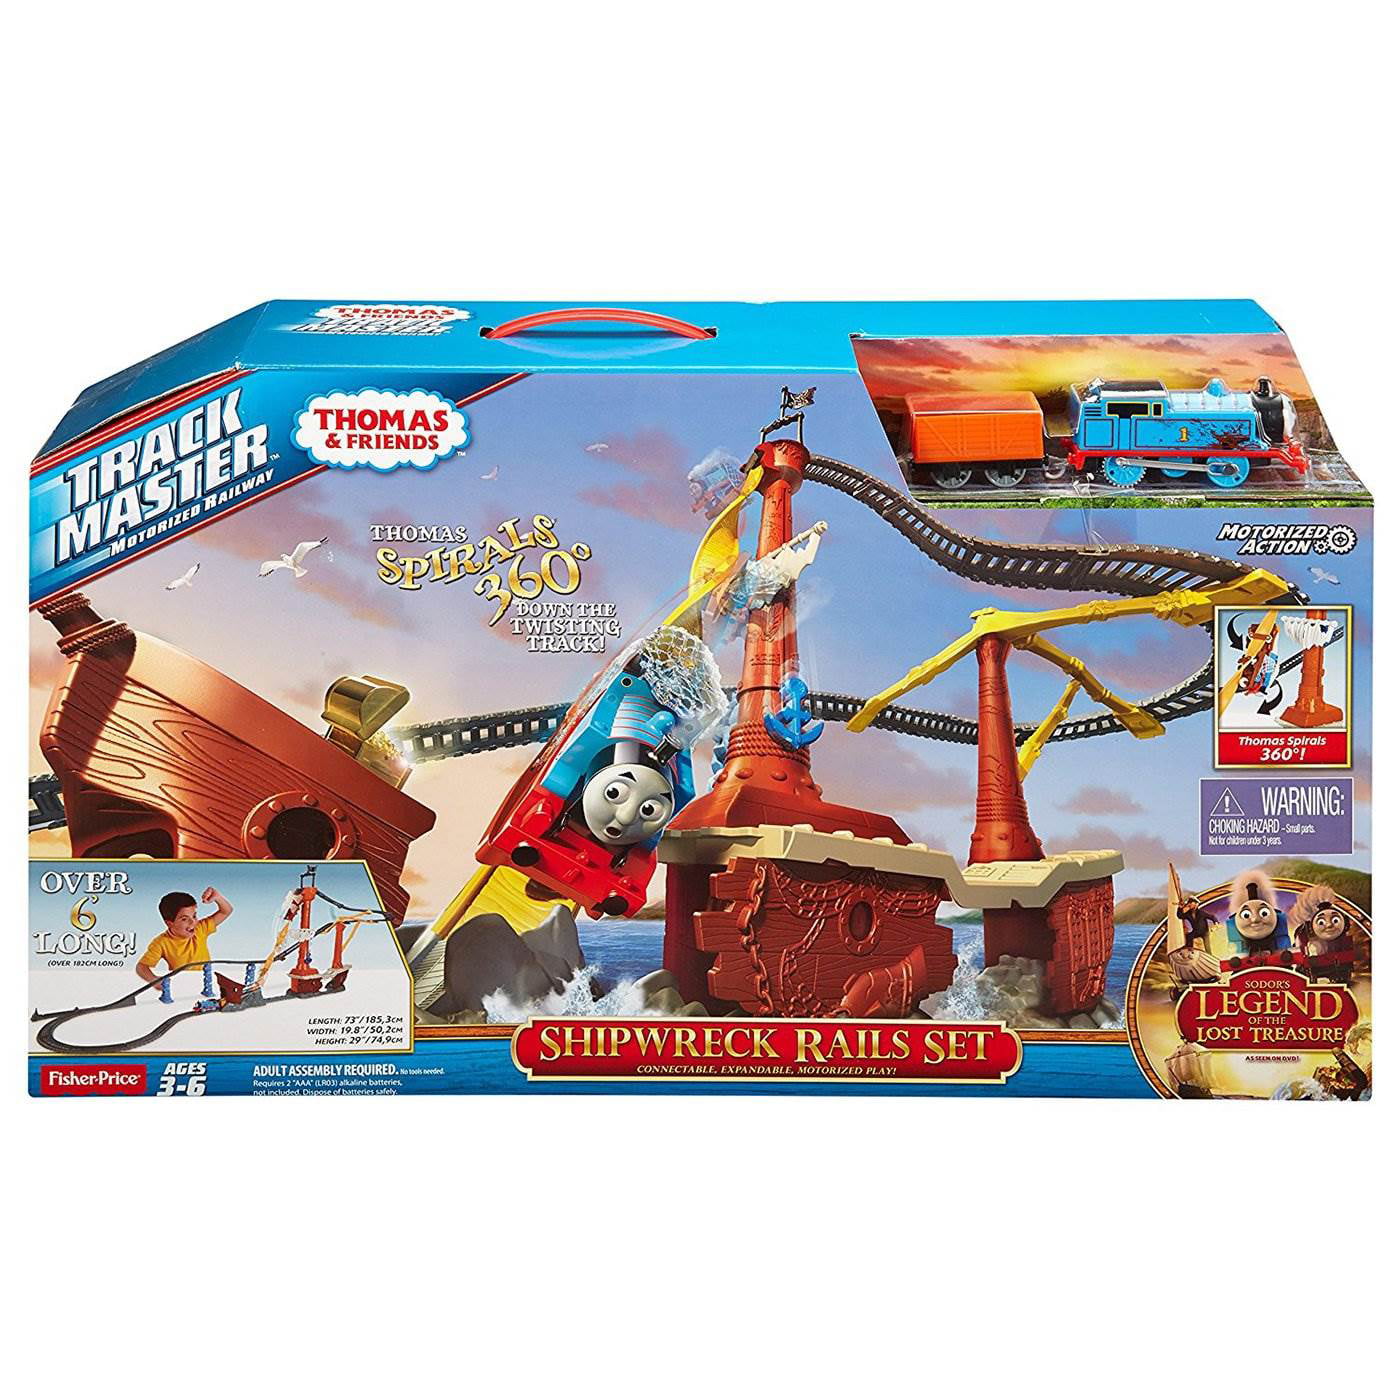 NEW OFFICIAL THOMA & FRIENDS TRACKMASTER SHIPWRECK TRAIN SET 